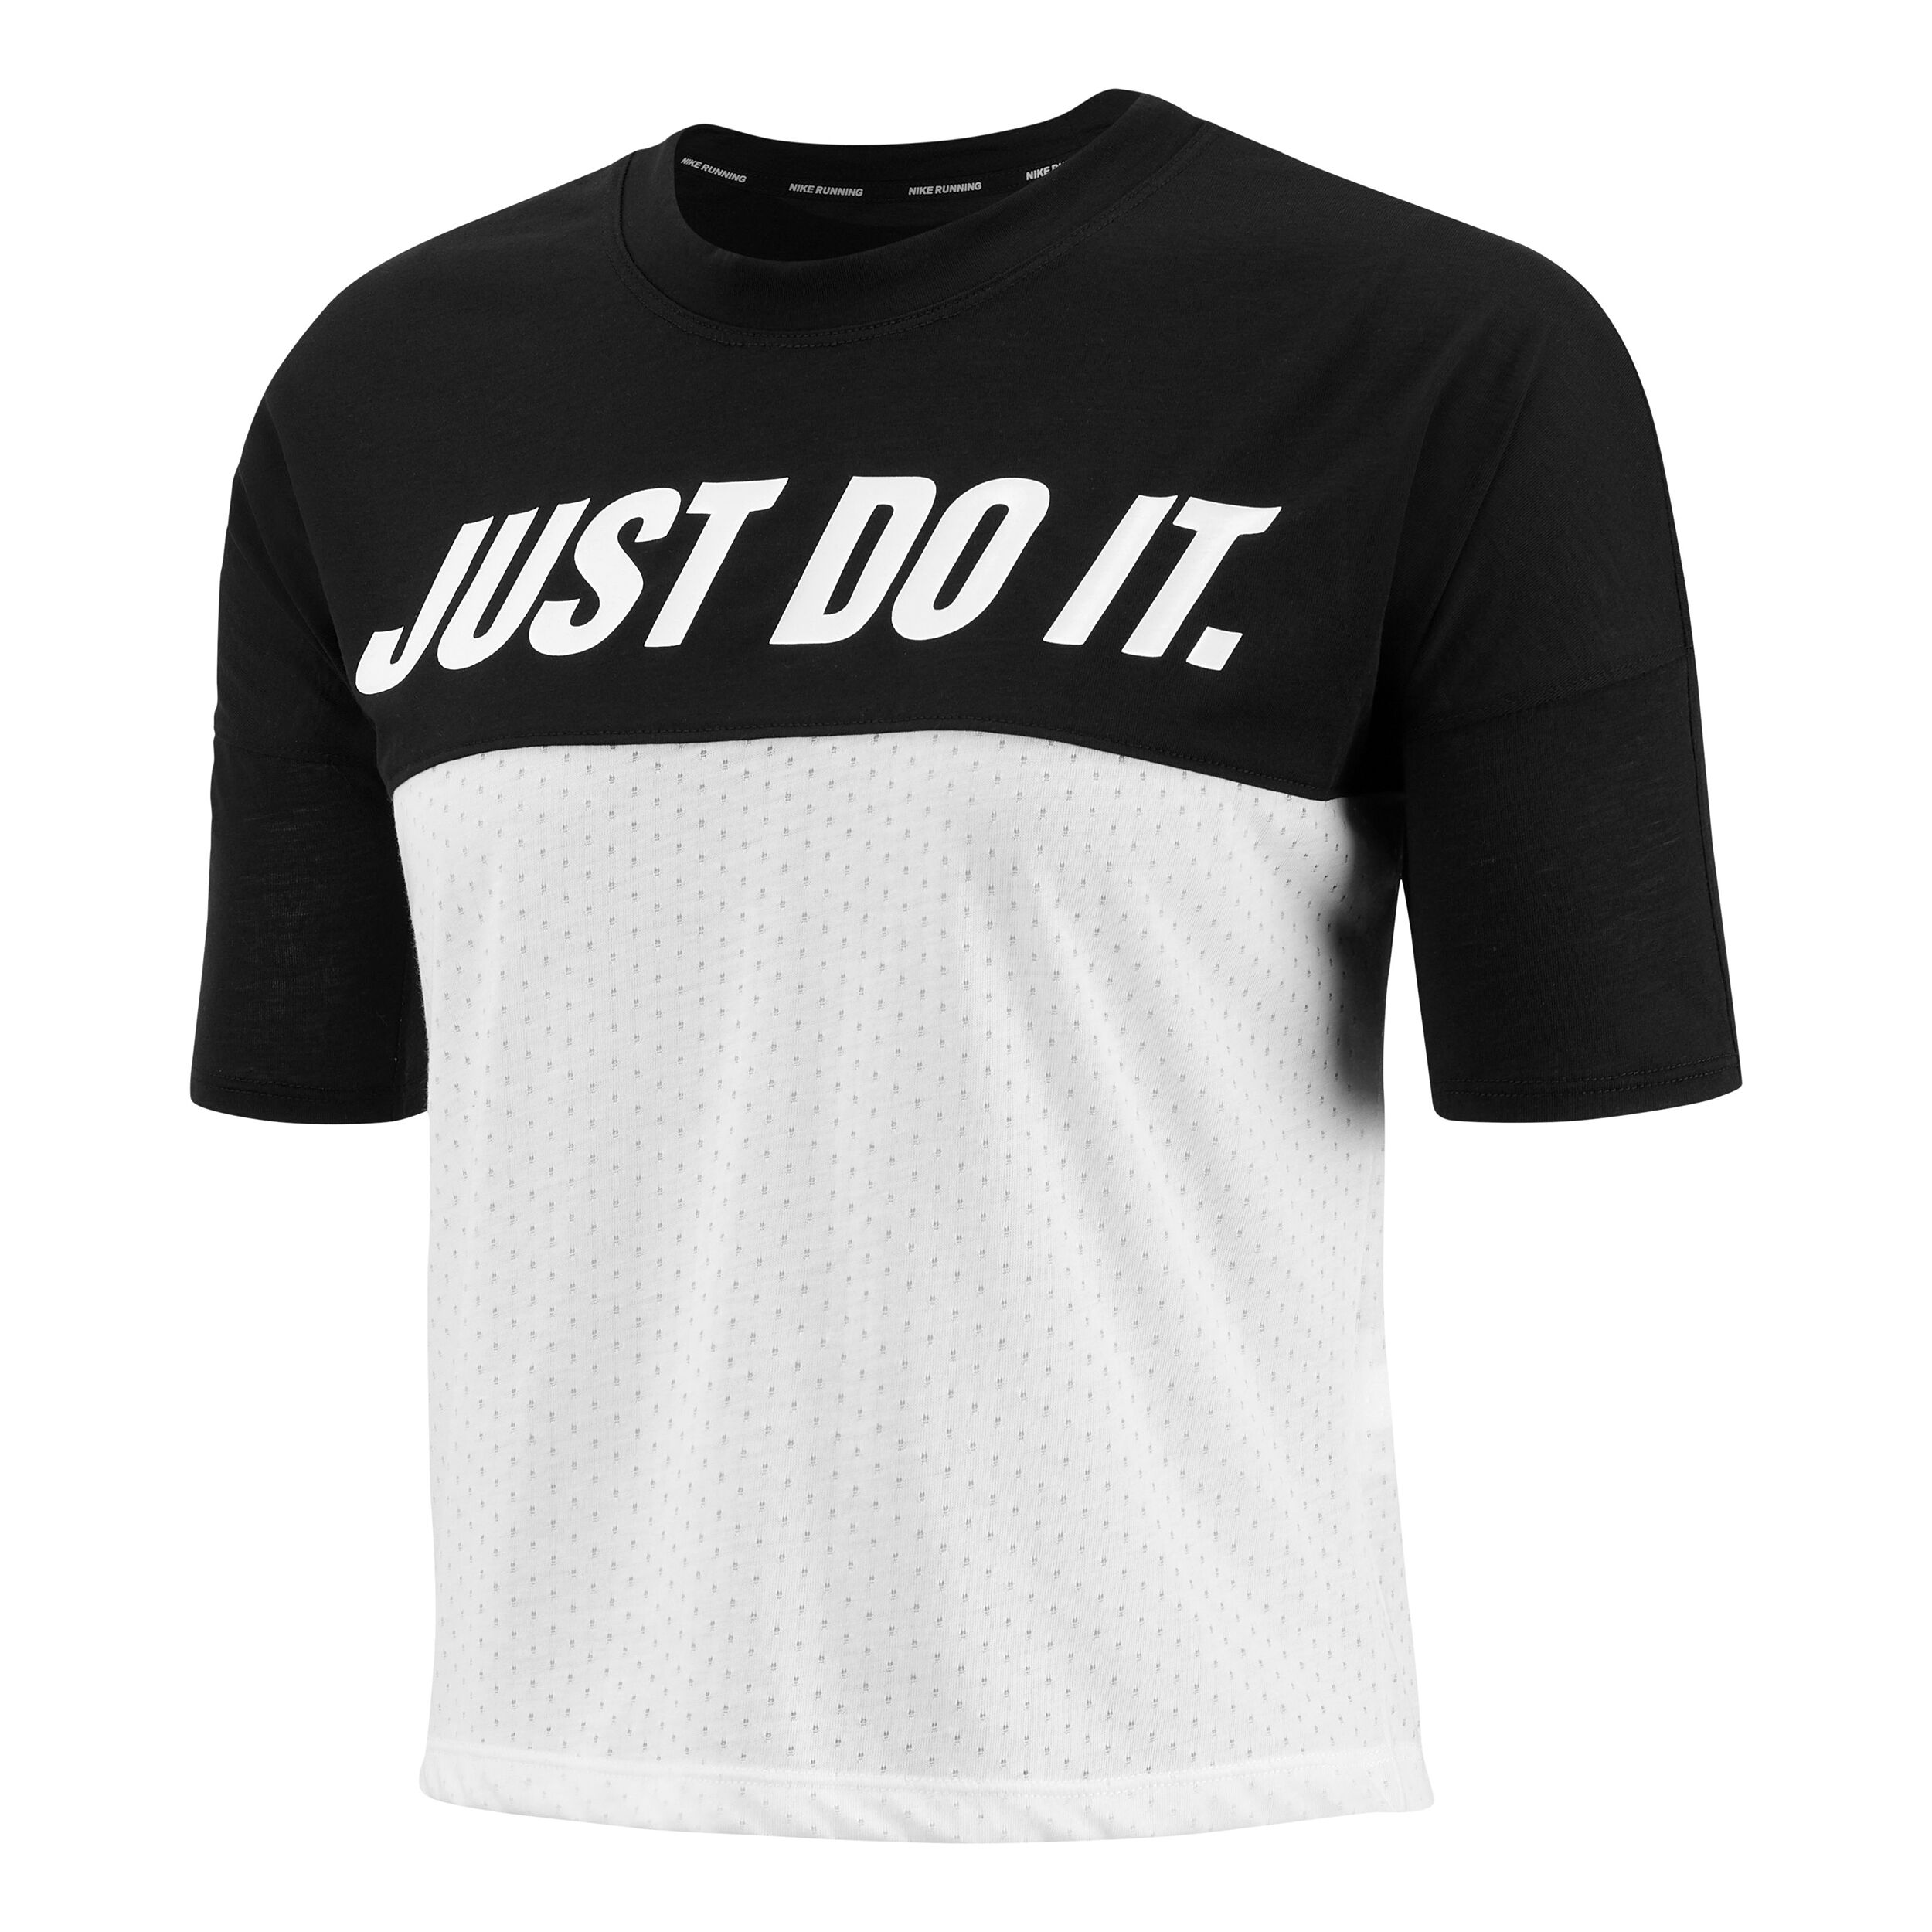 nike t shirts for womens online